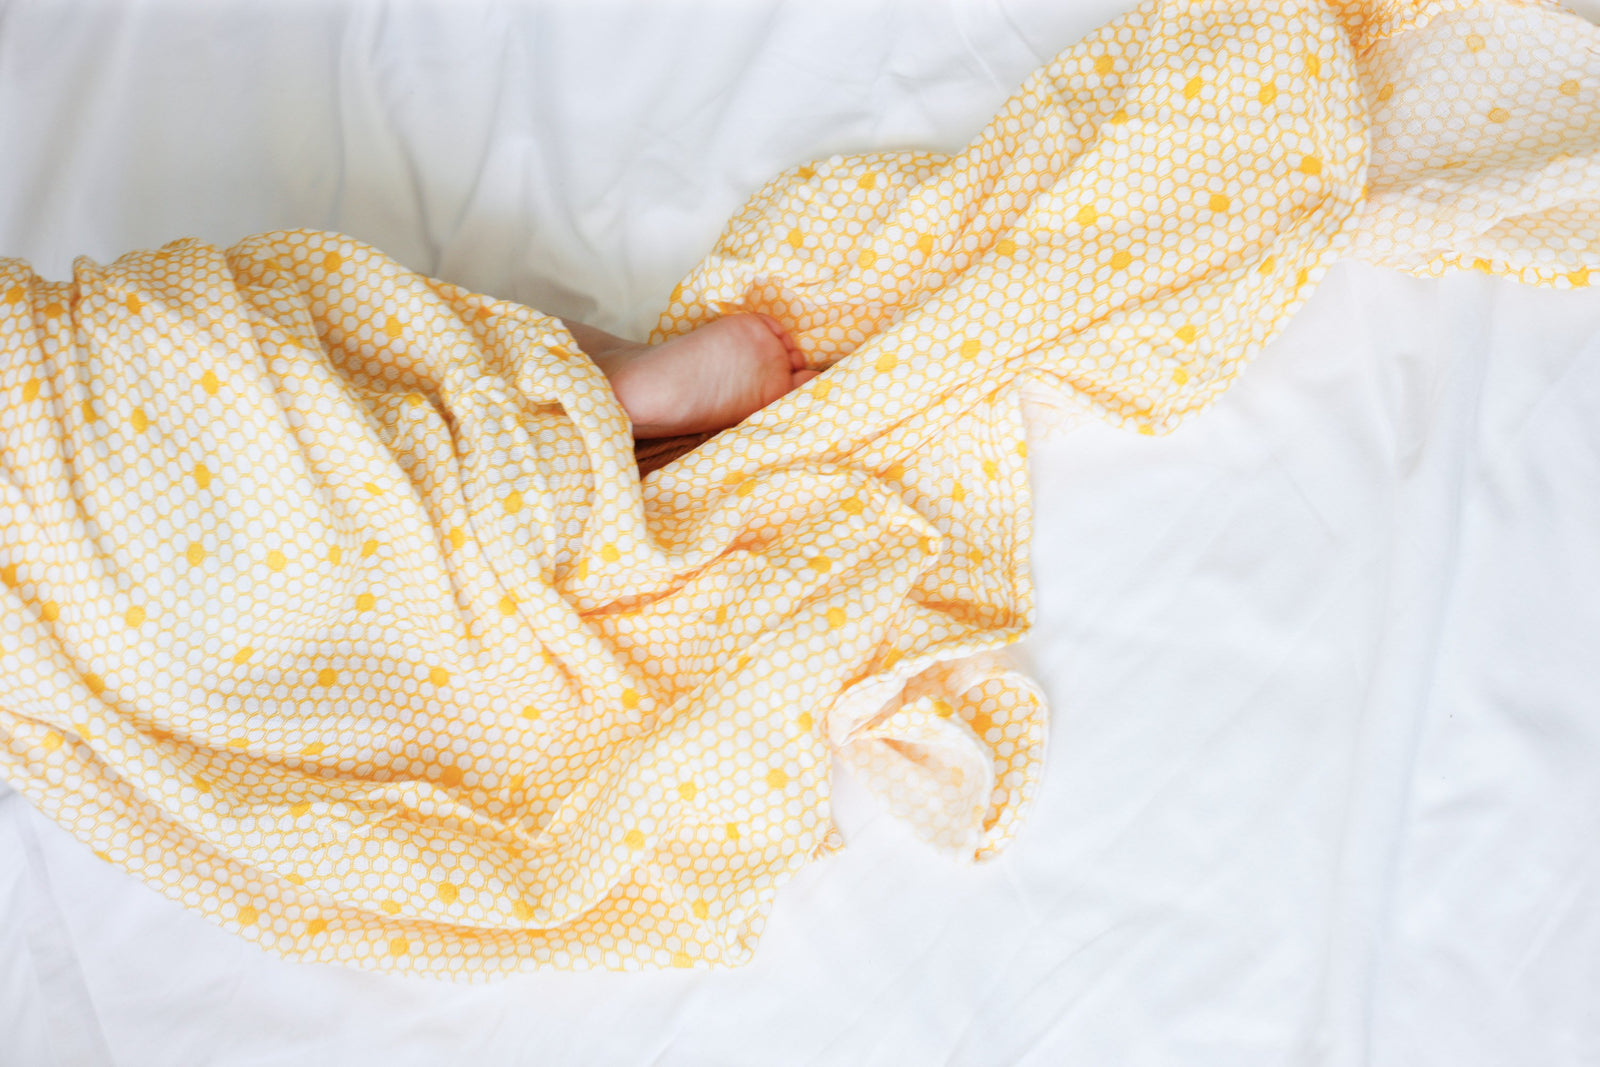 Hive Soft Organic Cotton Swaddle for Home or On the Go